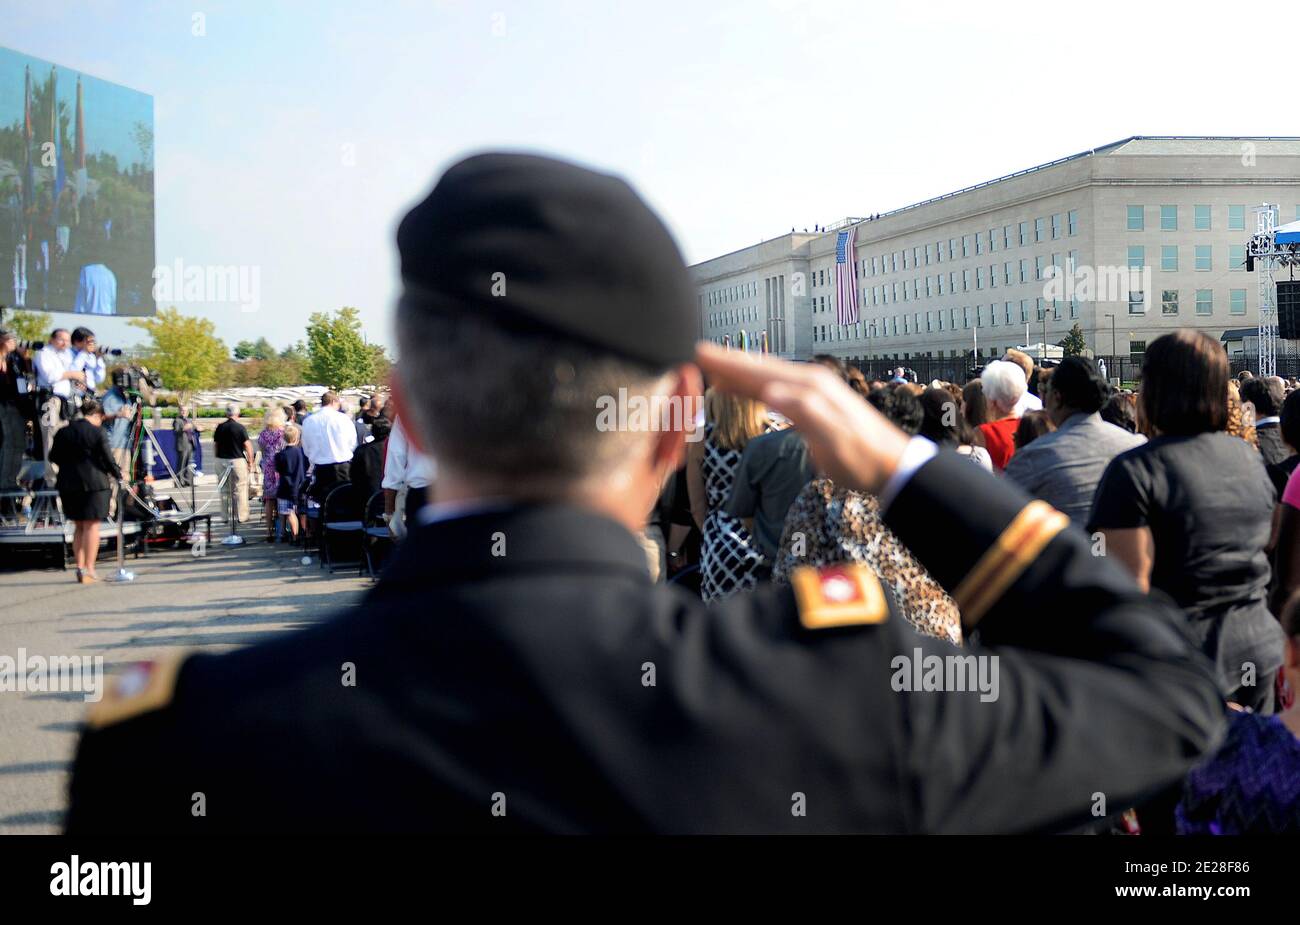 The Pentagon commemorates the 10th anniversary of 9/11 2001 terrorist attacks at the Pentagon on September 11, 2011 in Arlington, VA, USA. Photo by Olivier Douliery/ABACAPRESS.COM Stock Photo